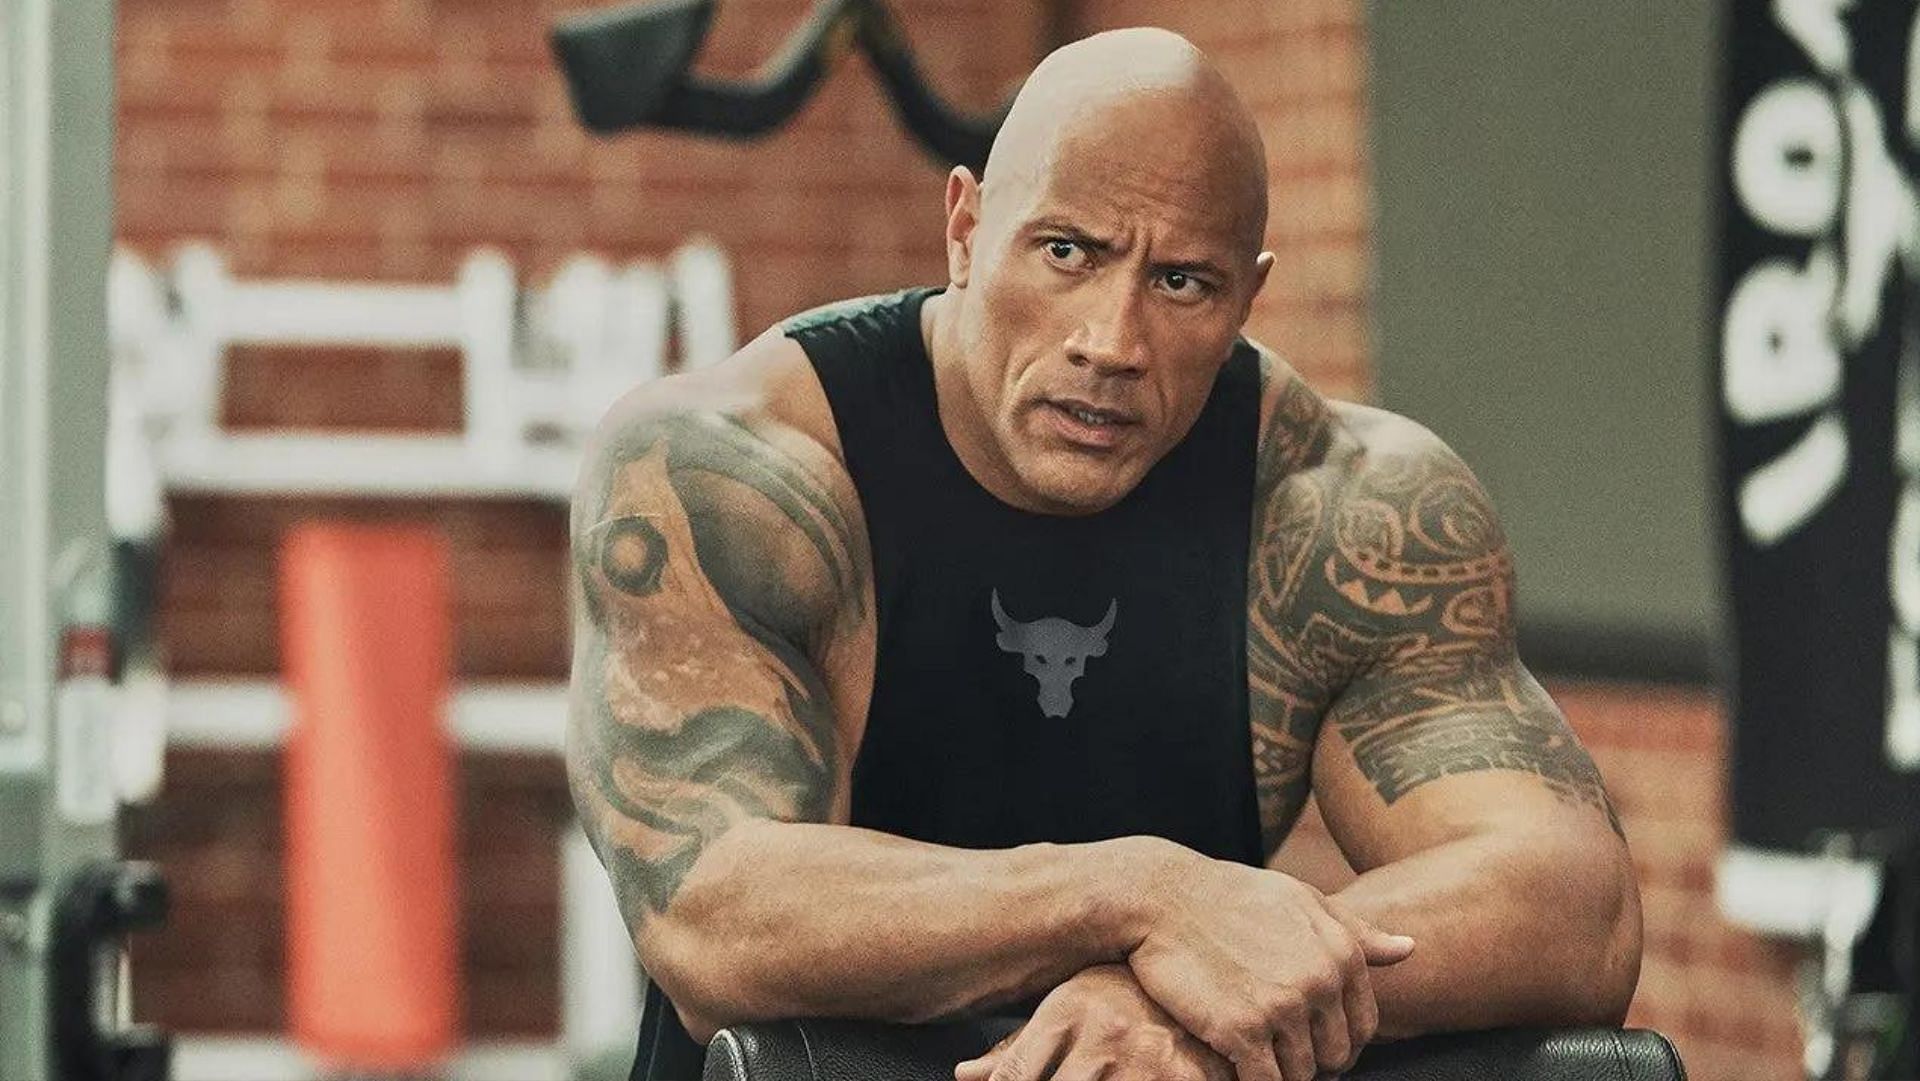 The Rock is open to match against Roman Reigns.